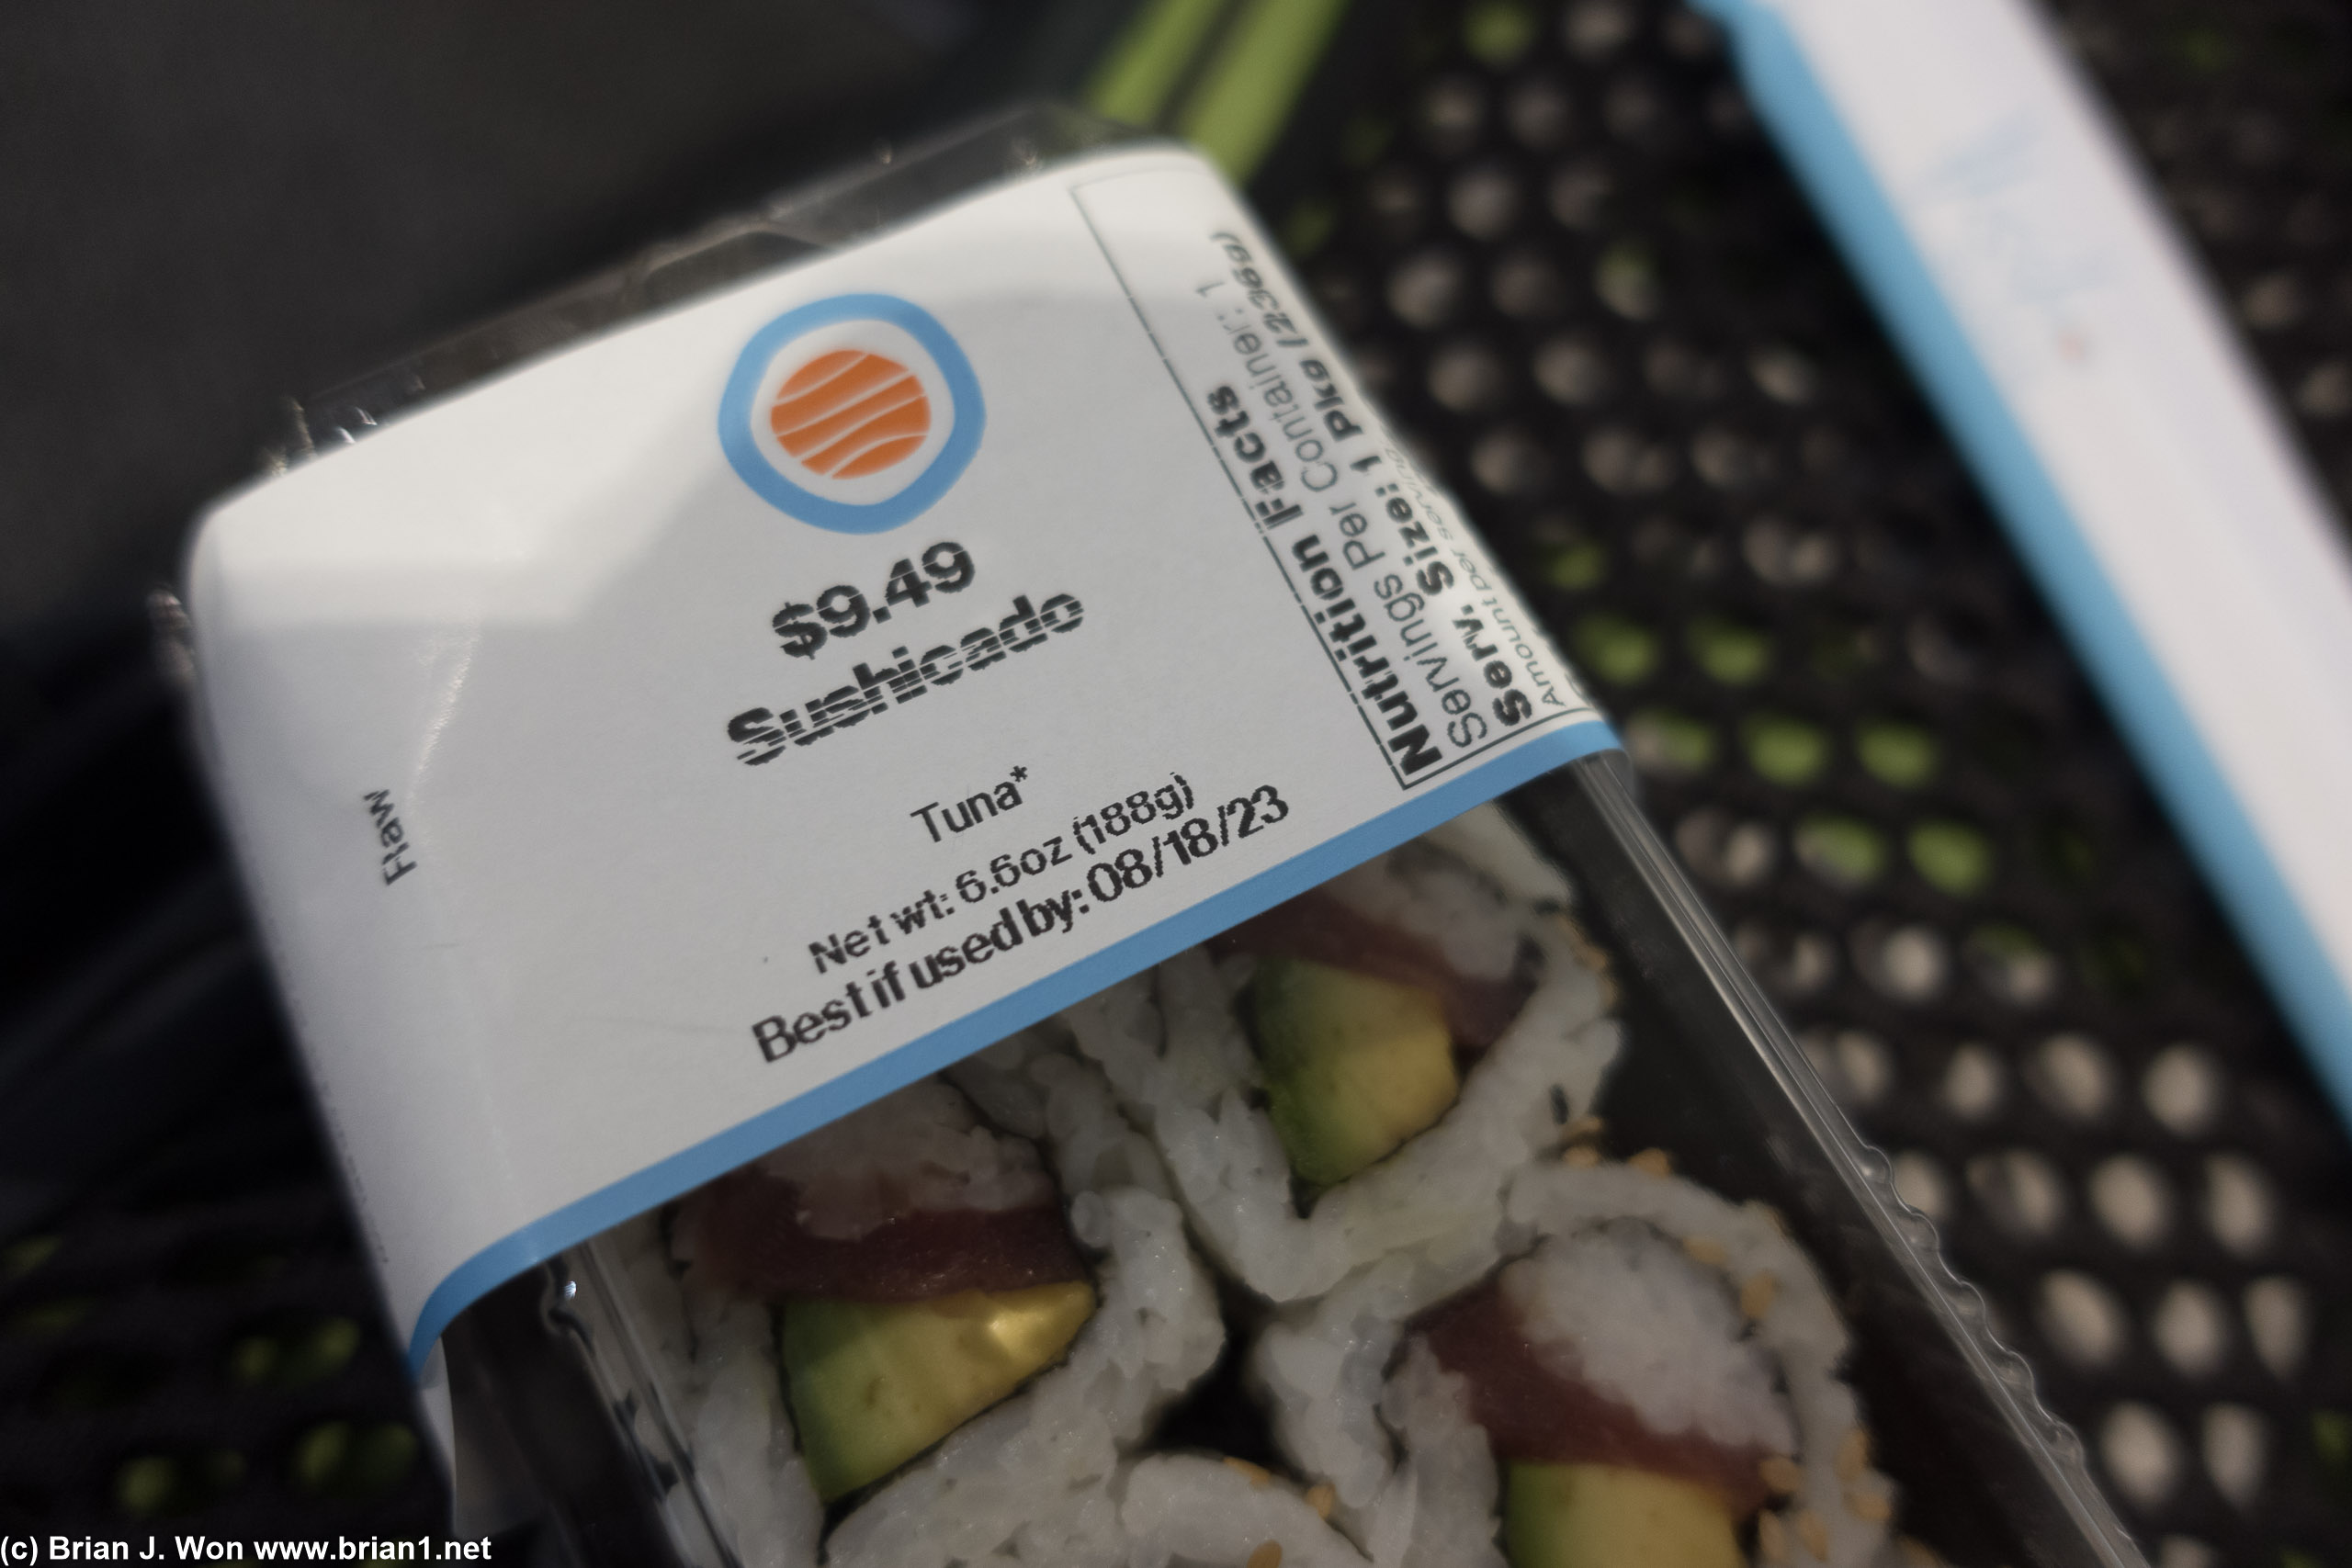 Do people here really not know what a "tuna and avocado" roll is that they need it advertised as "sushicado"?